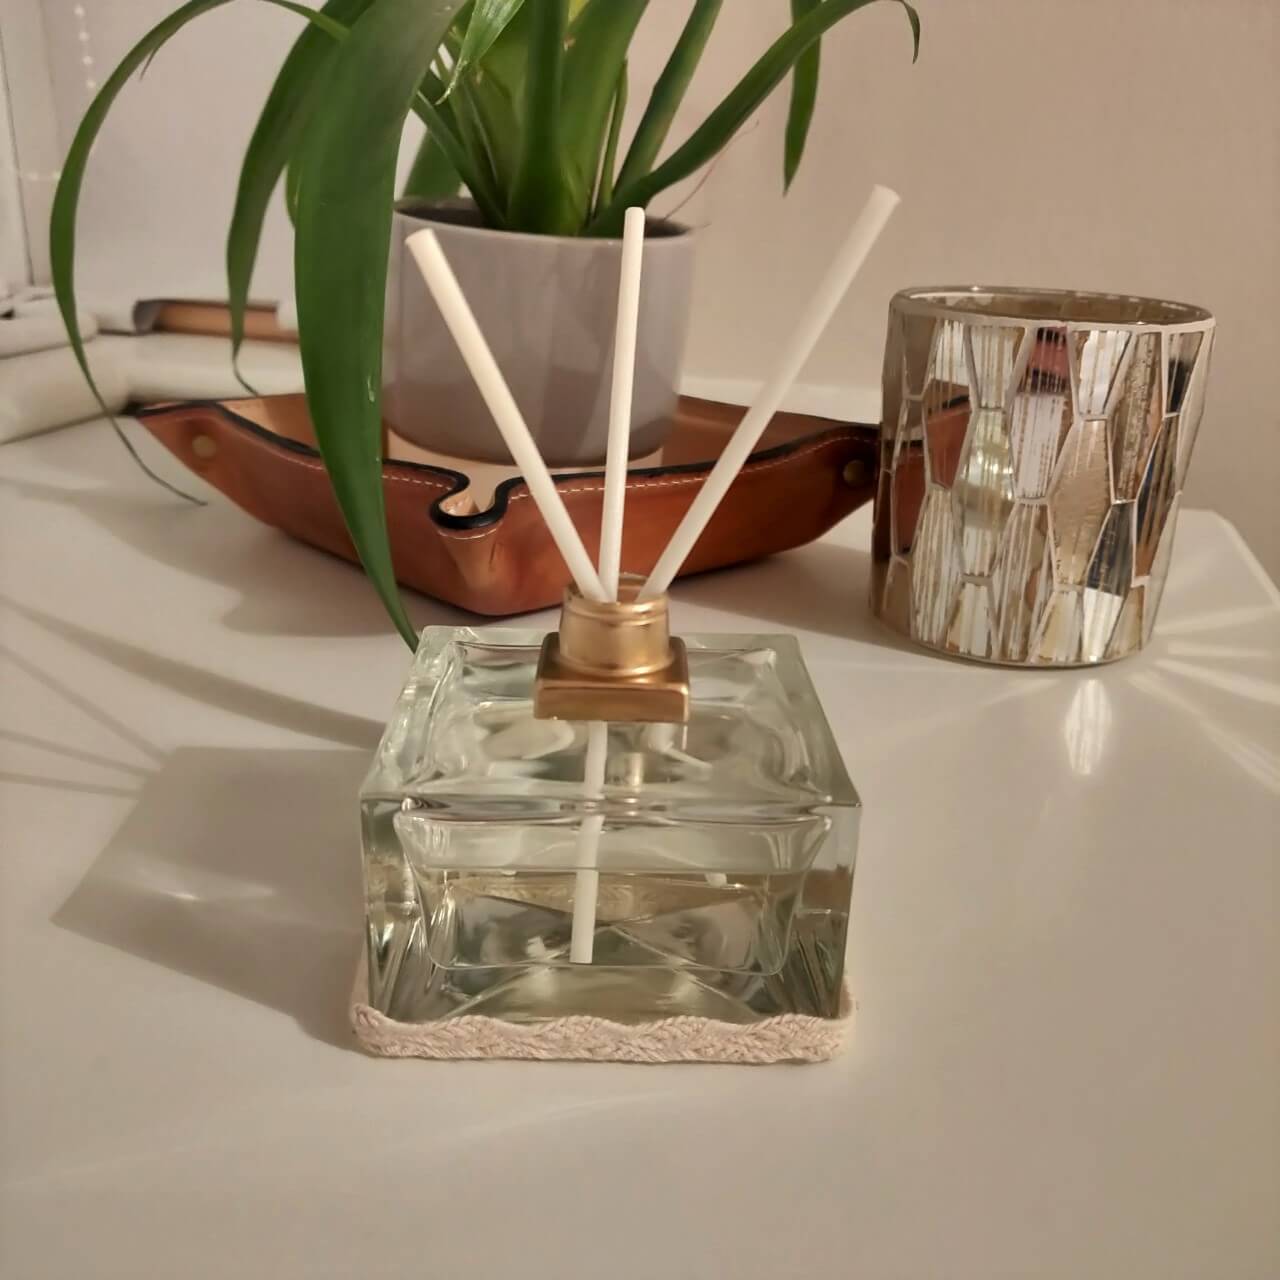 DIY Fragrance Diffuser Our Home Obsession